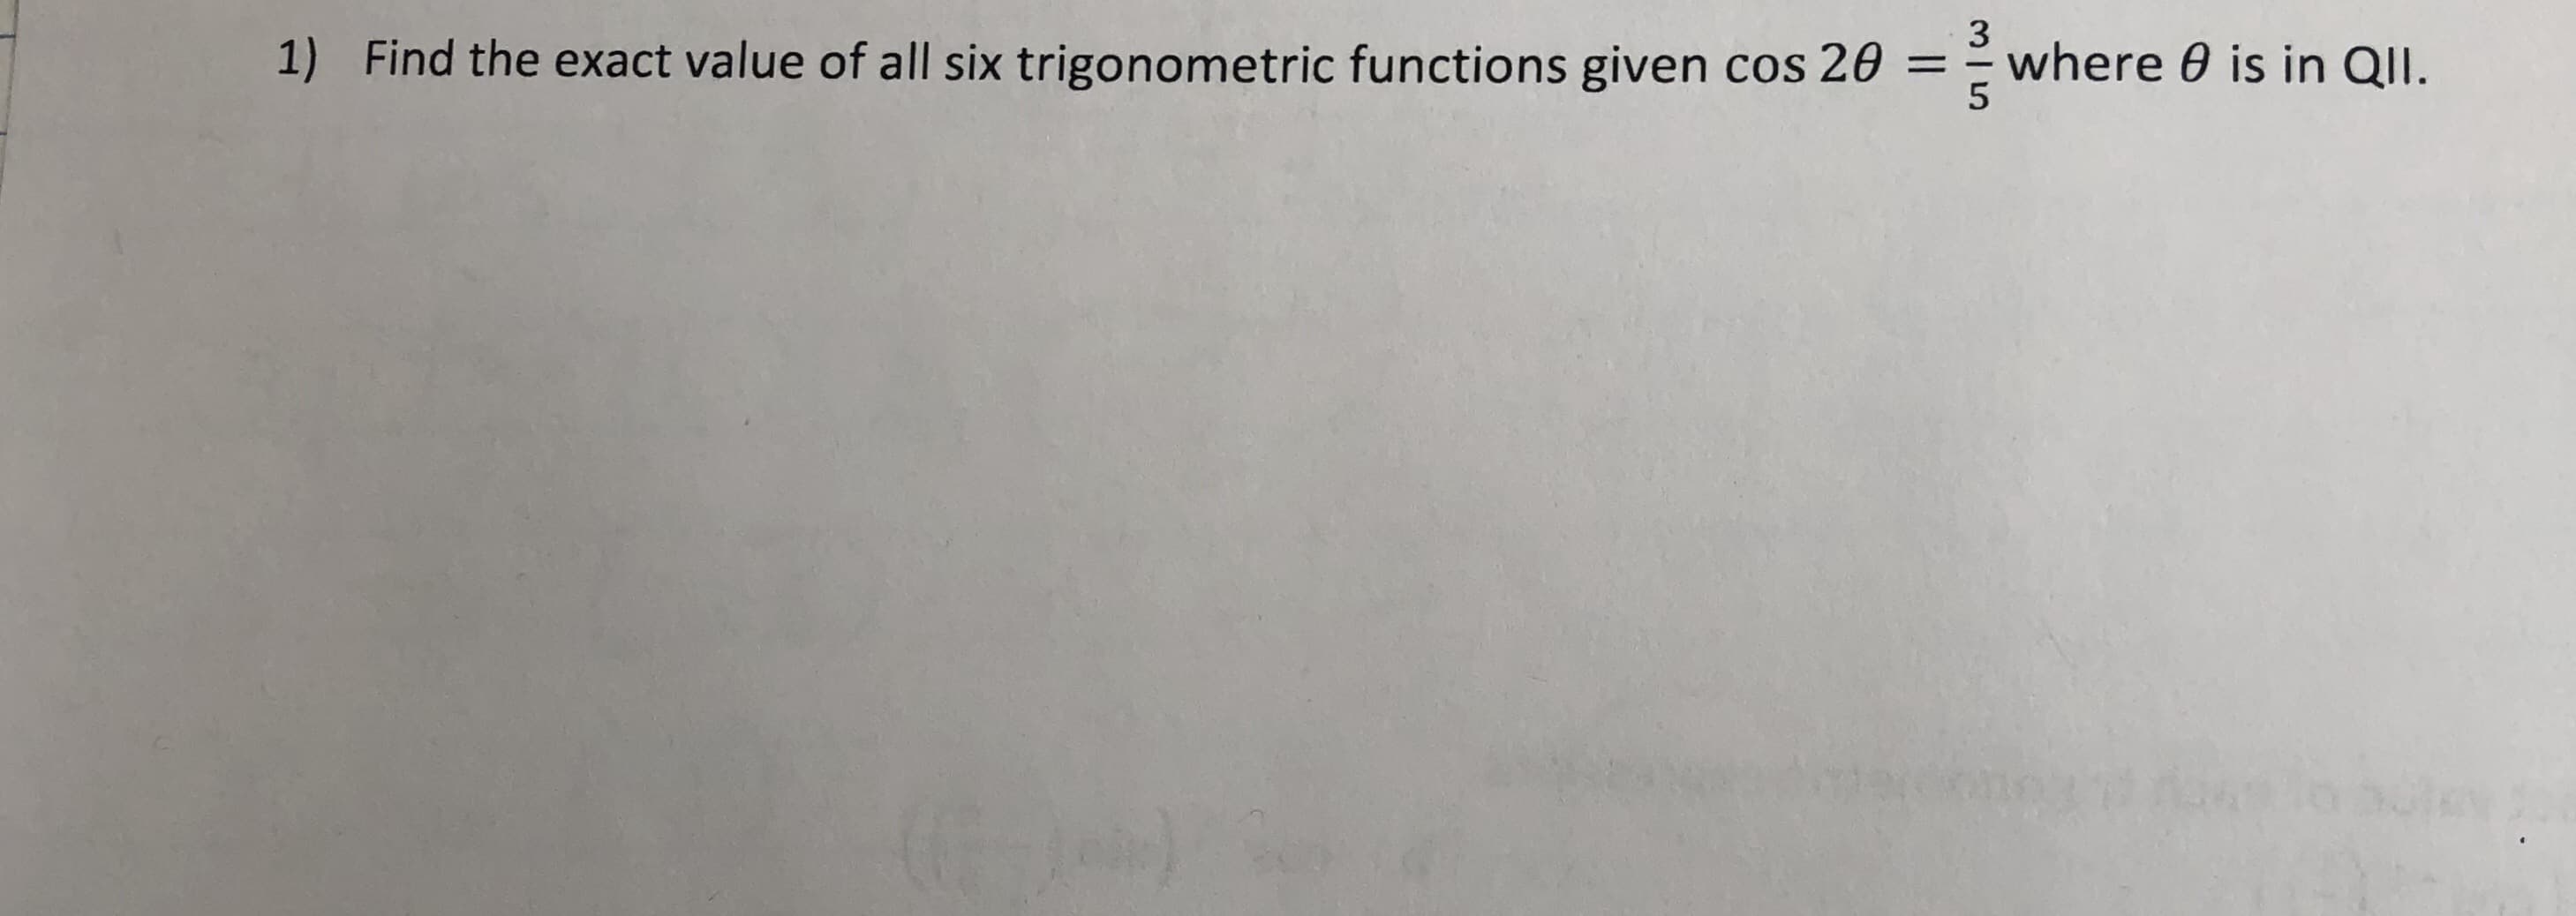 1) Find the exact value of all six trigonometric functions given cos 20 =
3
where 0 is in QII.
%3D
